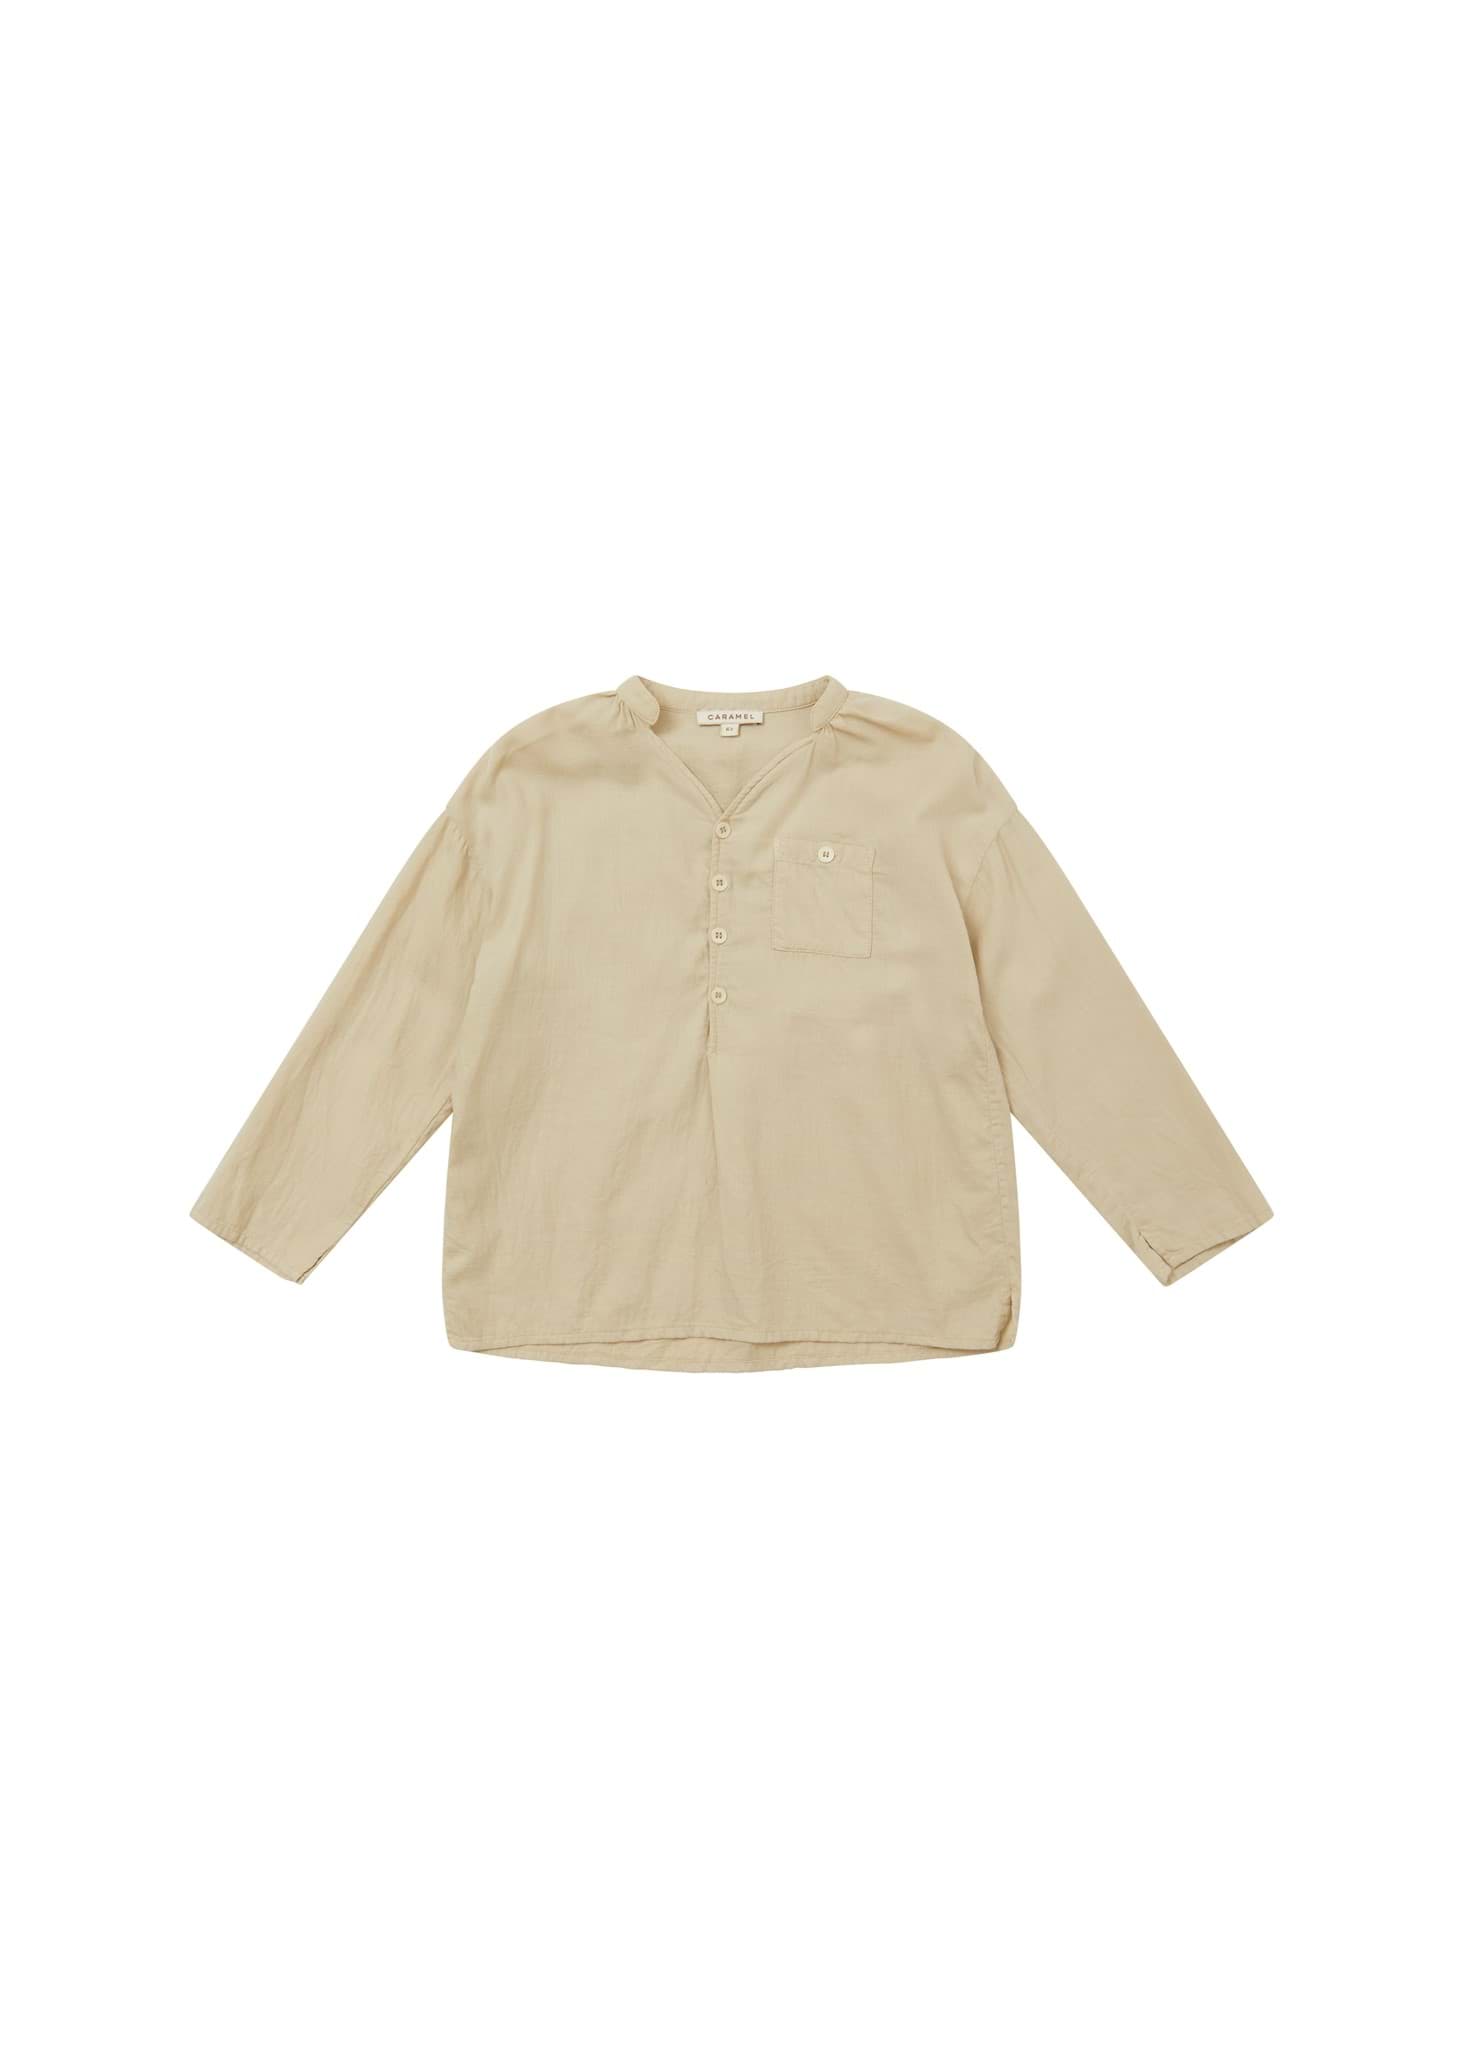 Picture of ADONIS SHIRT- SAND COTTON